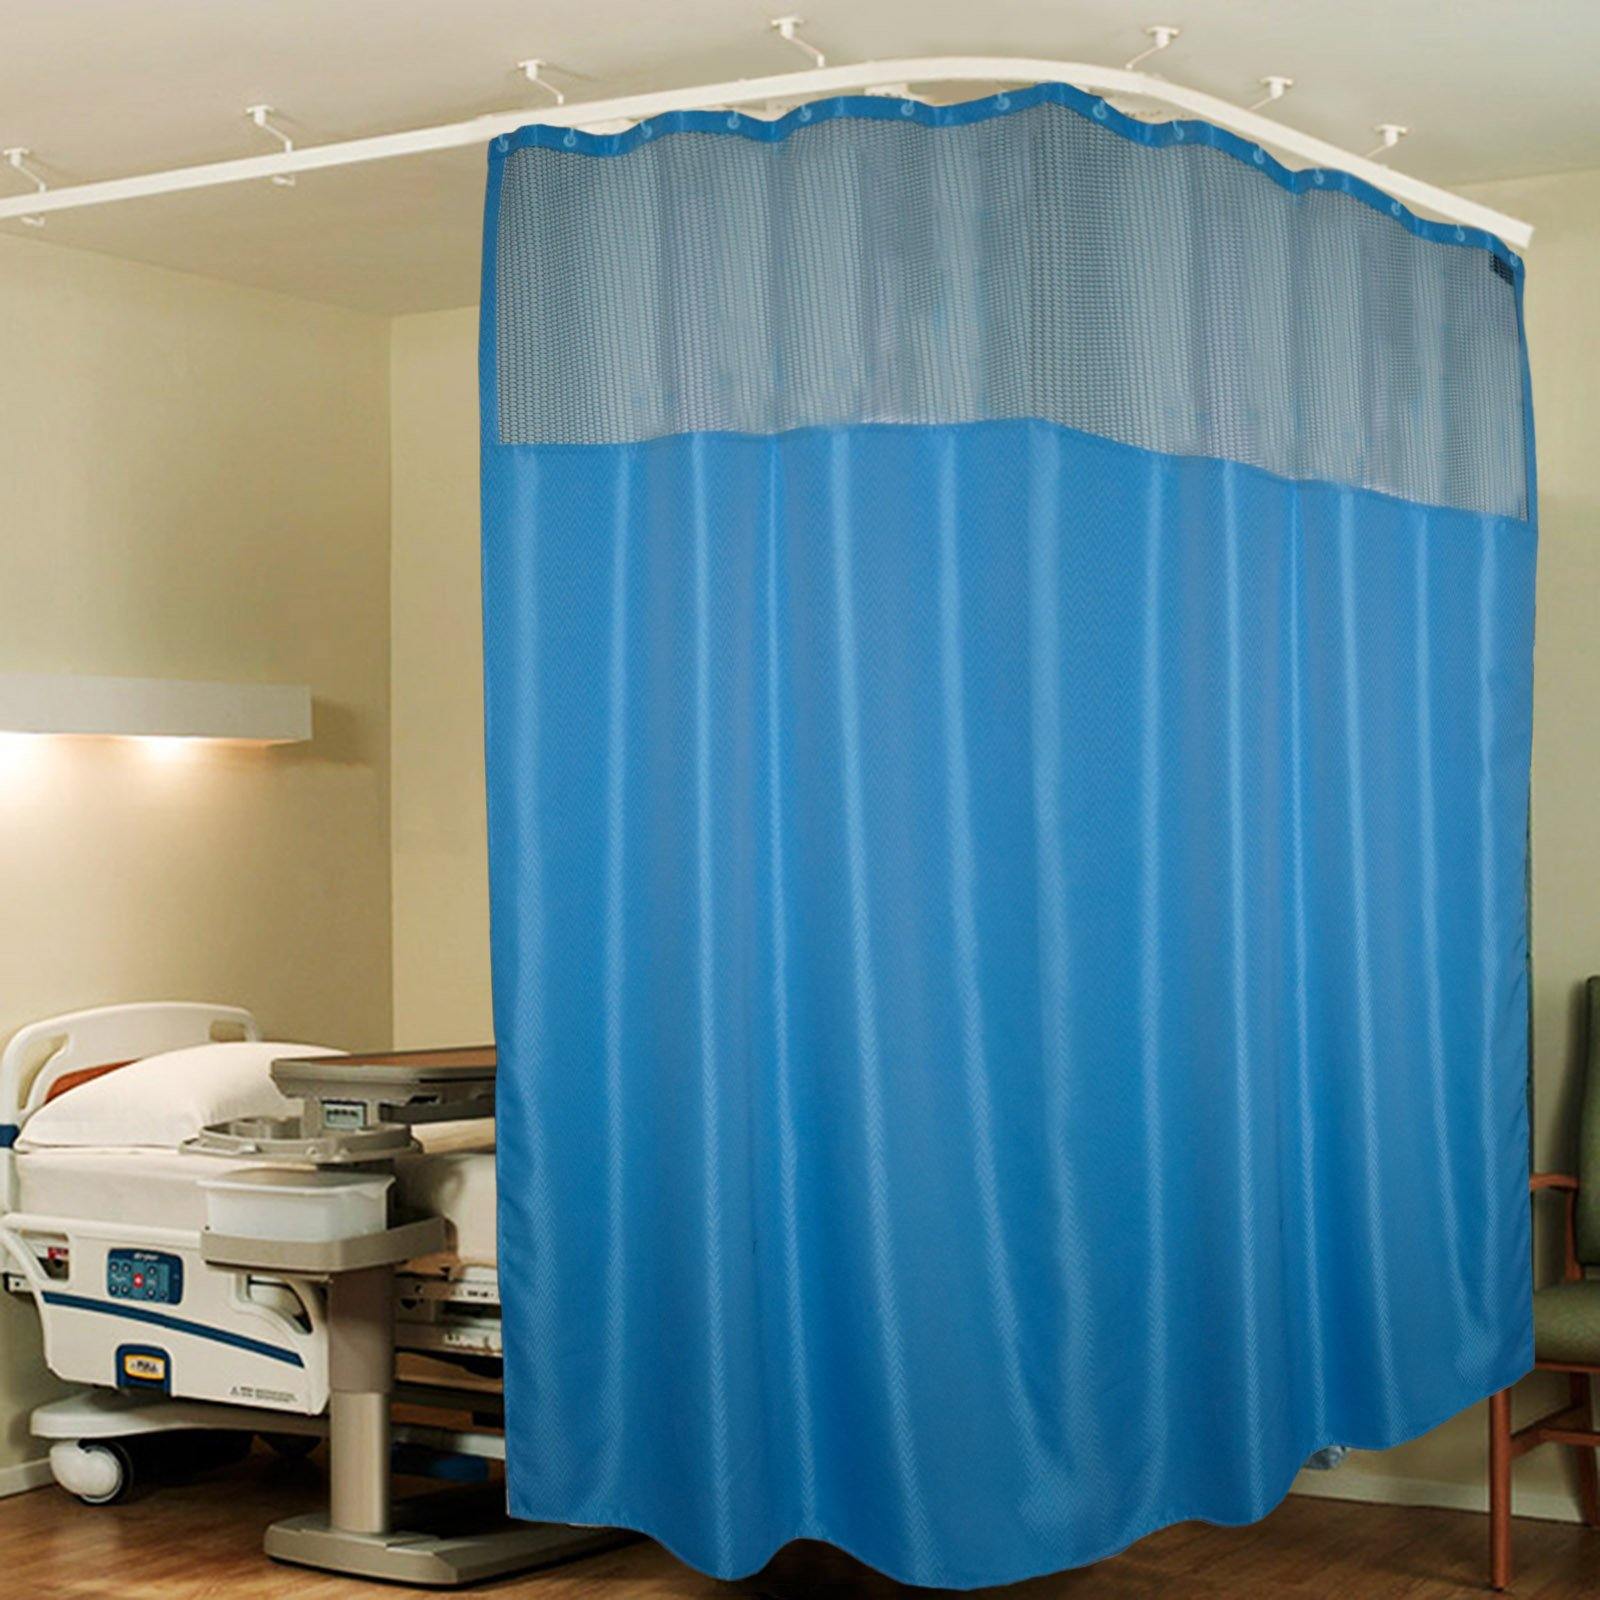 Lushomes Dark Blue ICU Partition Zig Zag Blue Net Hospital Curtain with with 24 eyelets and 24 C-hooks (12Ft x 7Ft, 3 Panels Attached) - Lushomes